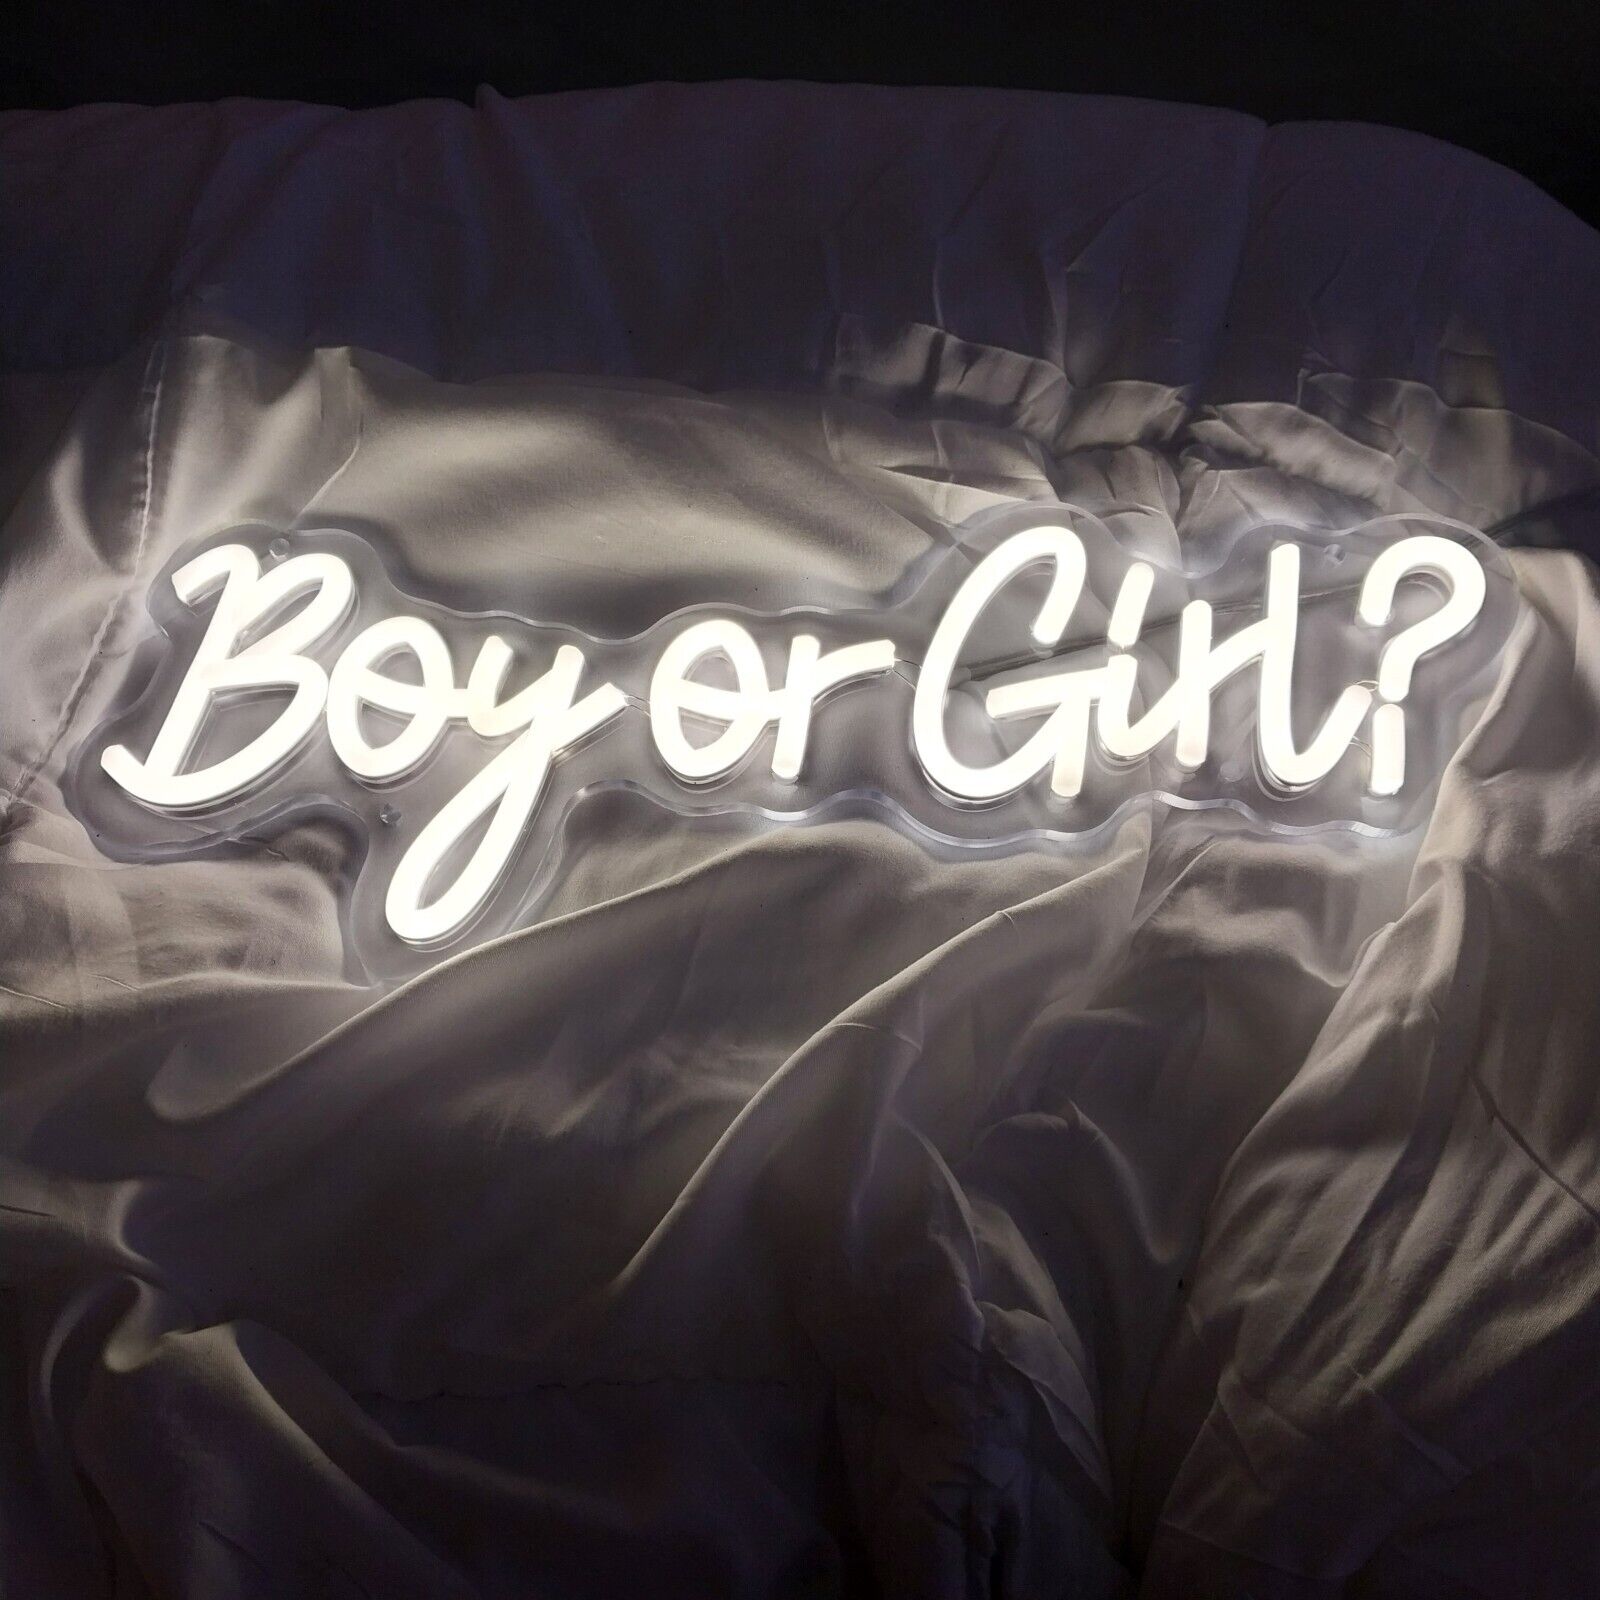 Jumbo Size Boy or Girl 30 inch LED Light Sign Gender Reveal Party Neon Sign...